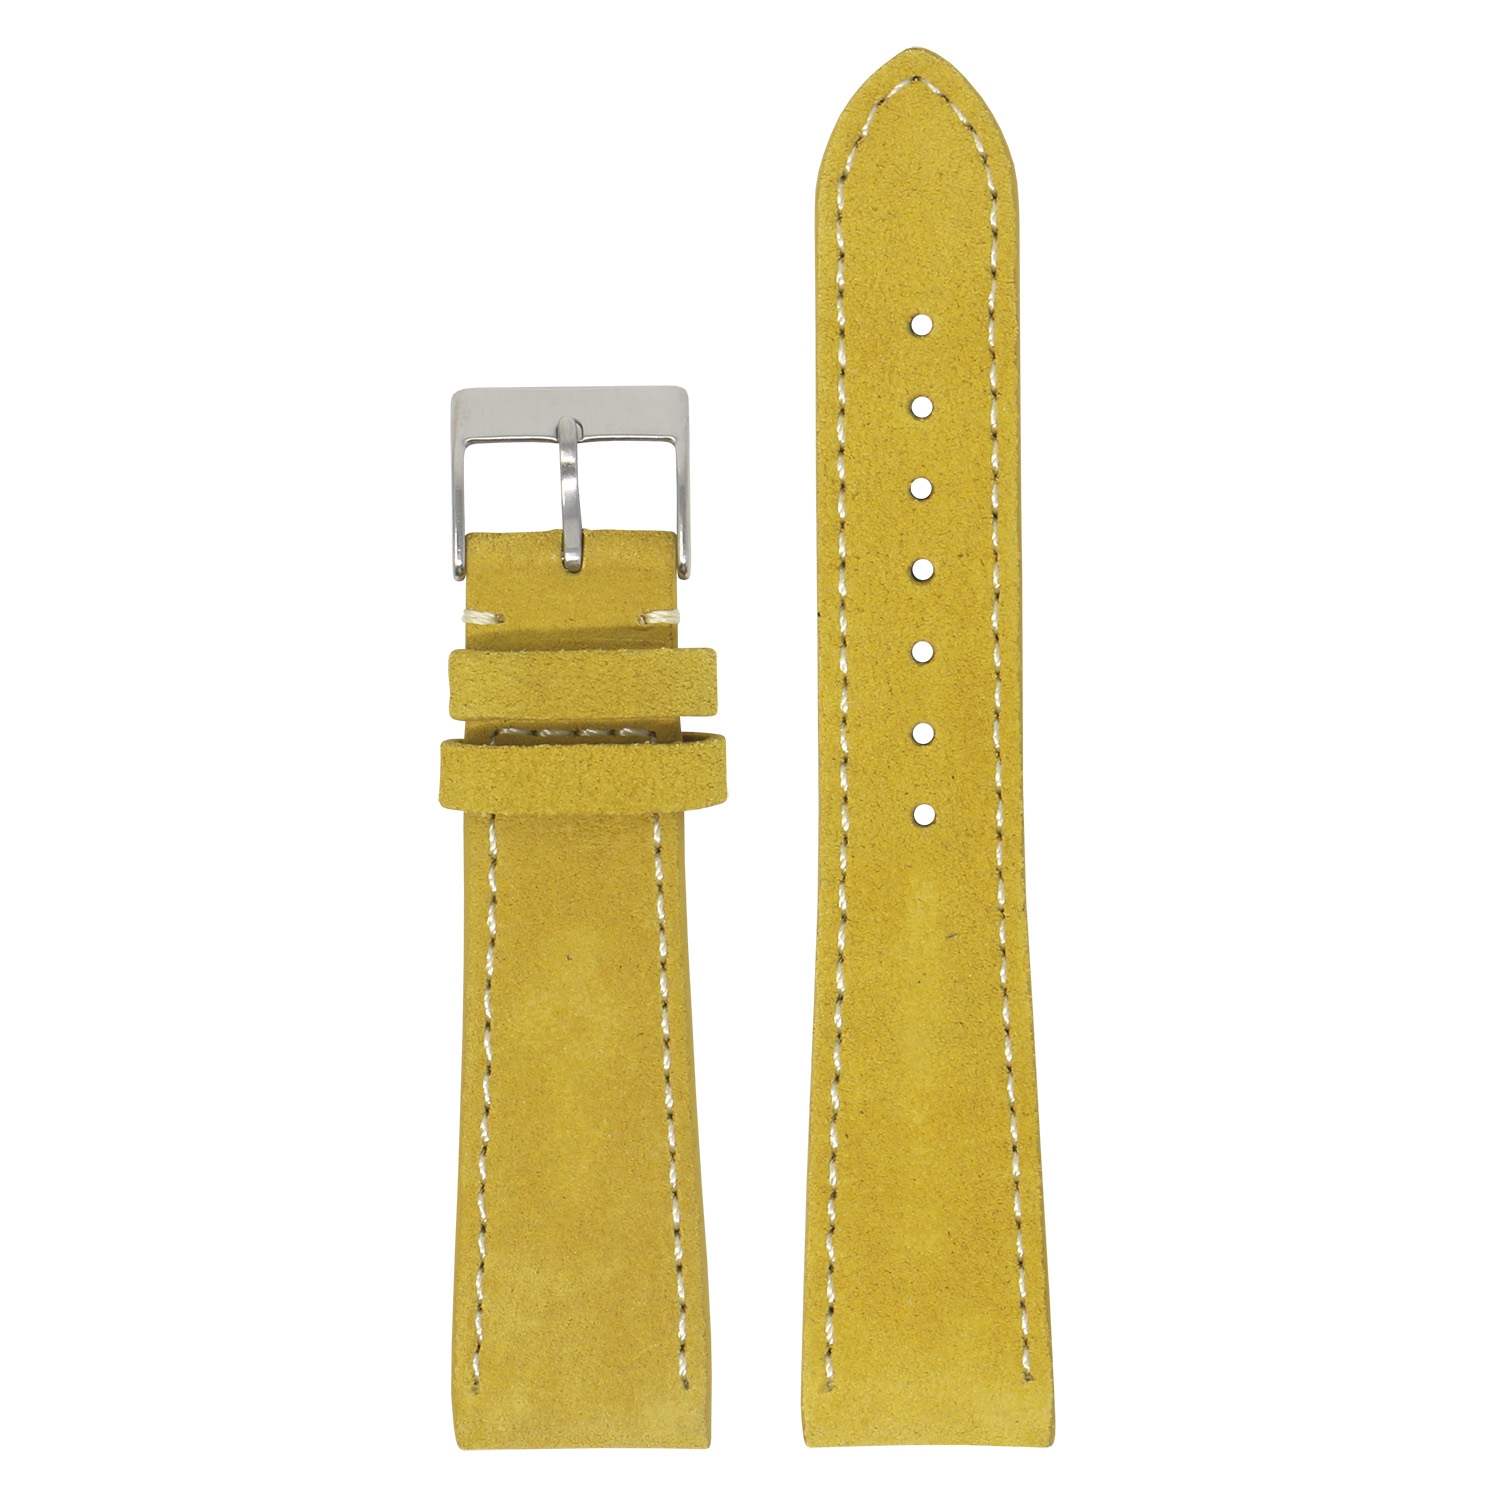 StrapsCo Classic Suede (Short, Standard, Long) Watch Band Strap for Samsung Galaxy Watch 3 - Long Length - 22mm - For 45mm Galaxy Watch3 - Yellow